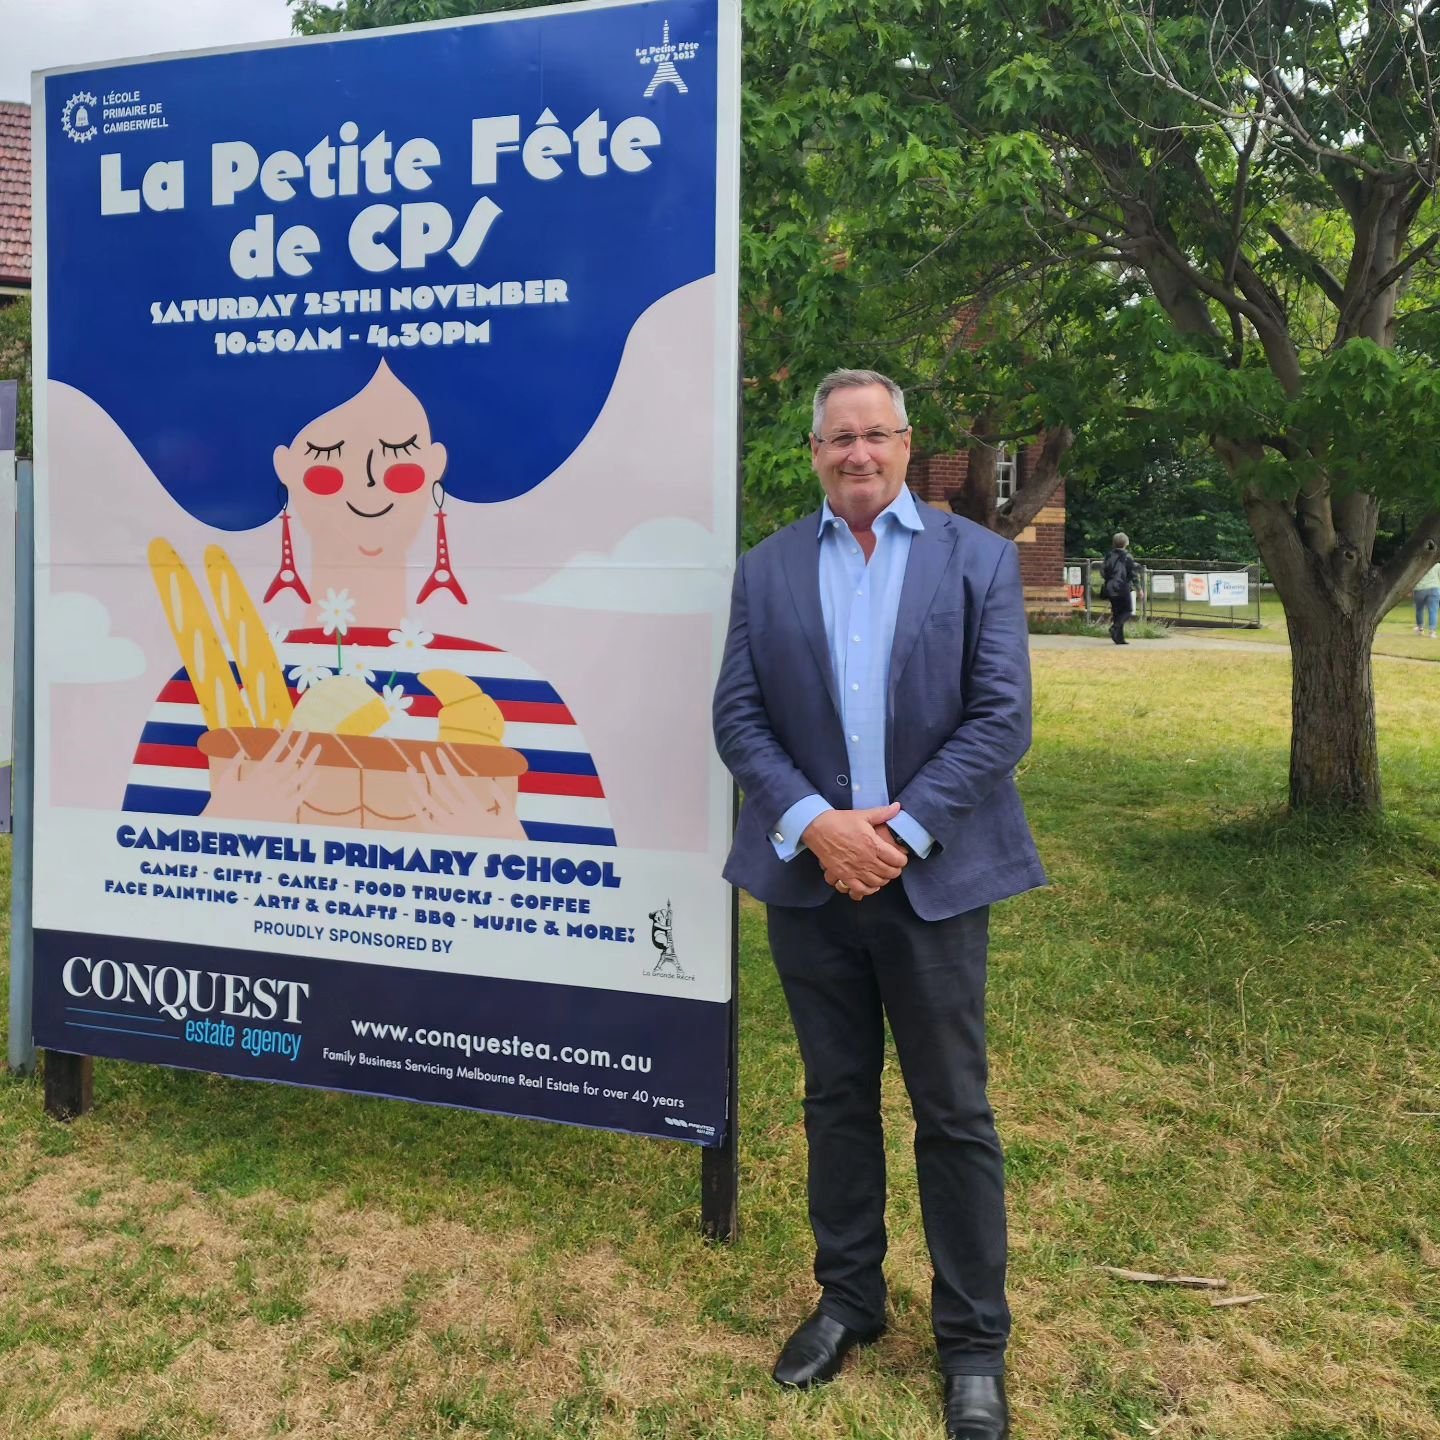 Looking forward to officially opening the new garden and play space at Camberwell Primary School this Saturday.

If you're around, come visit La Petite F&ecirc;te from 10.30AM to enjoy the festivities and say hi.